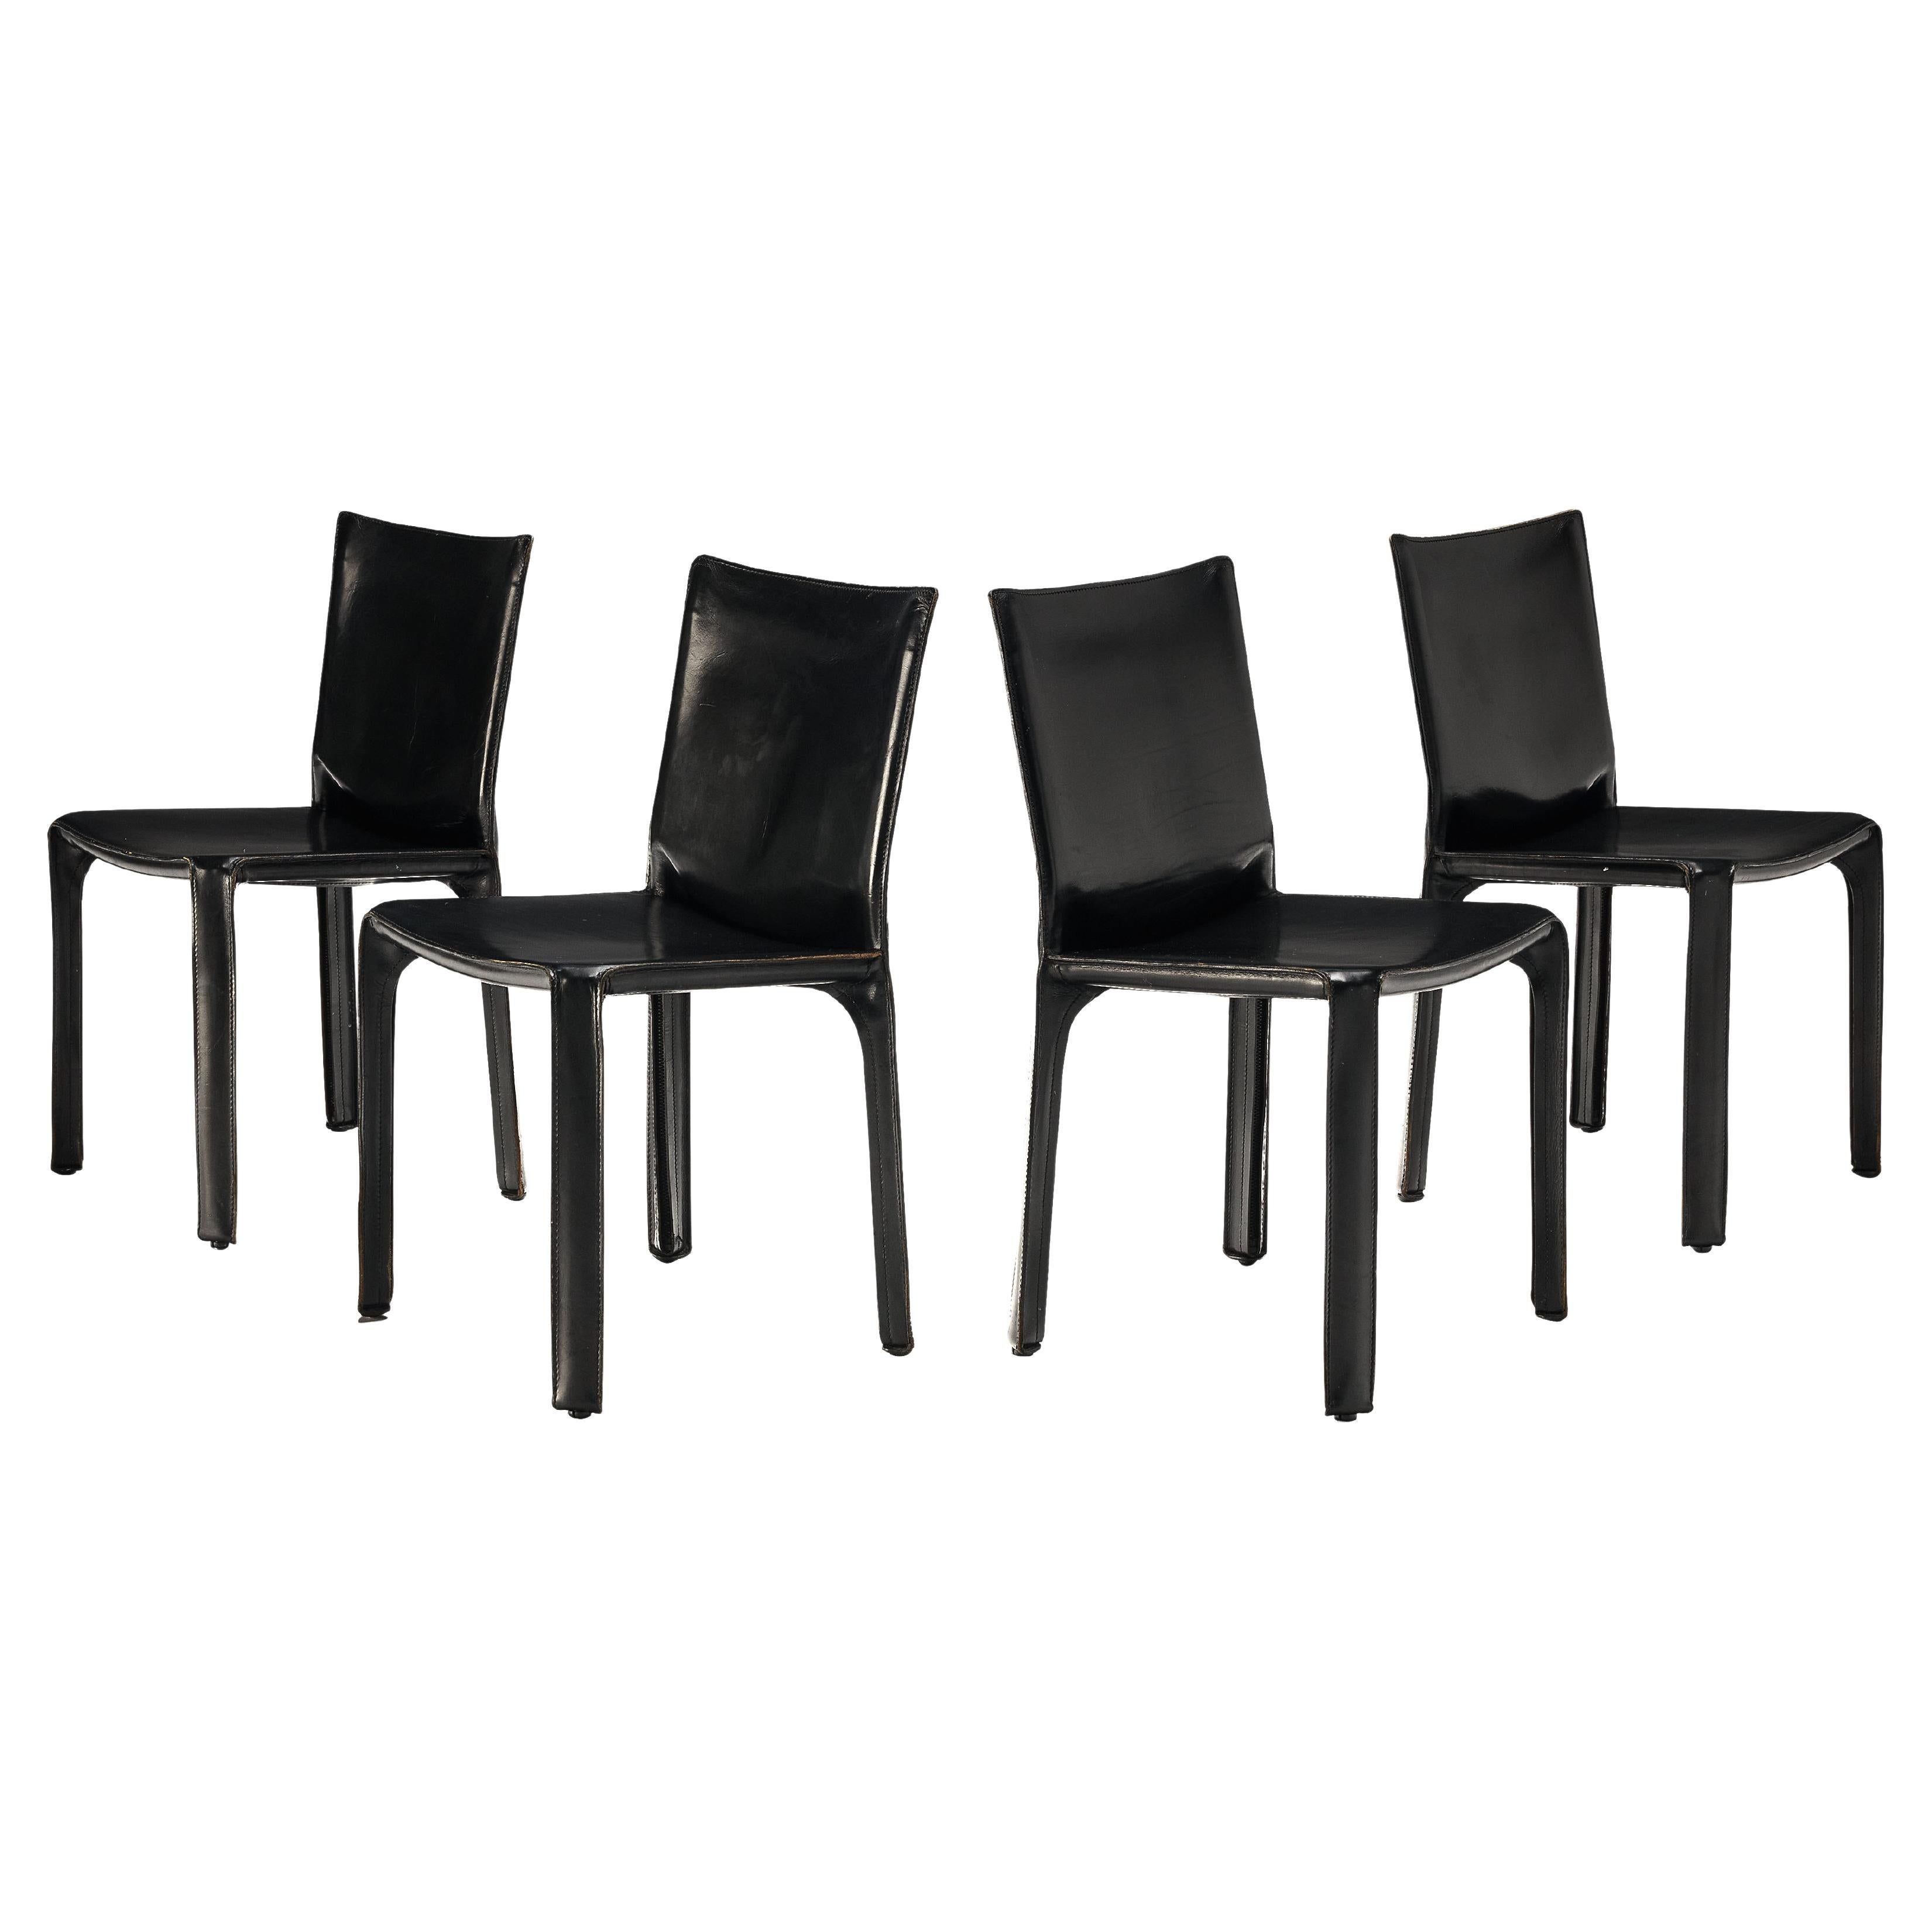 Mario Bellini for Cassina Set of Four Black 'Cab' Dining Chairs in Leather 